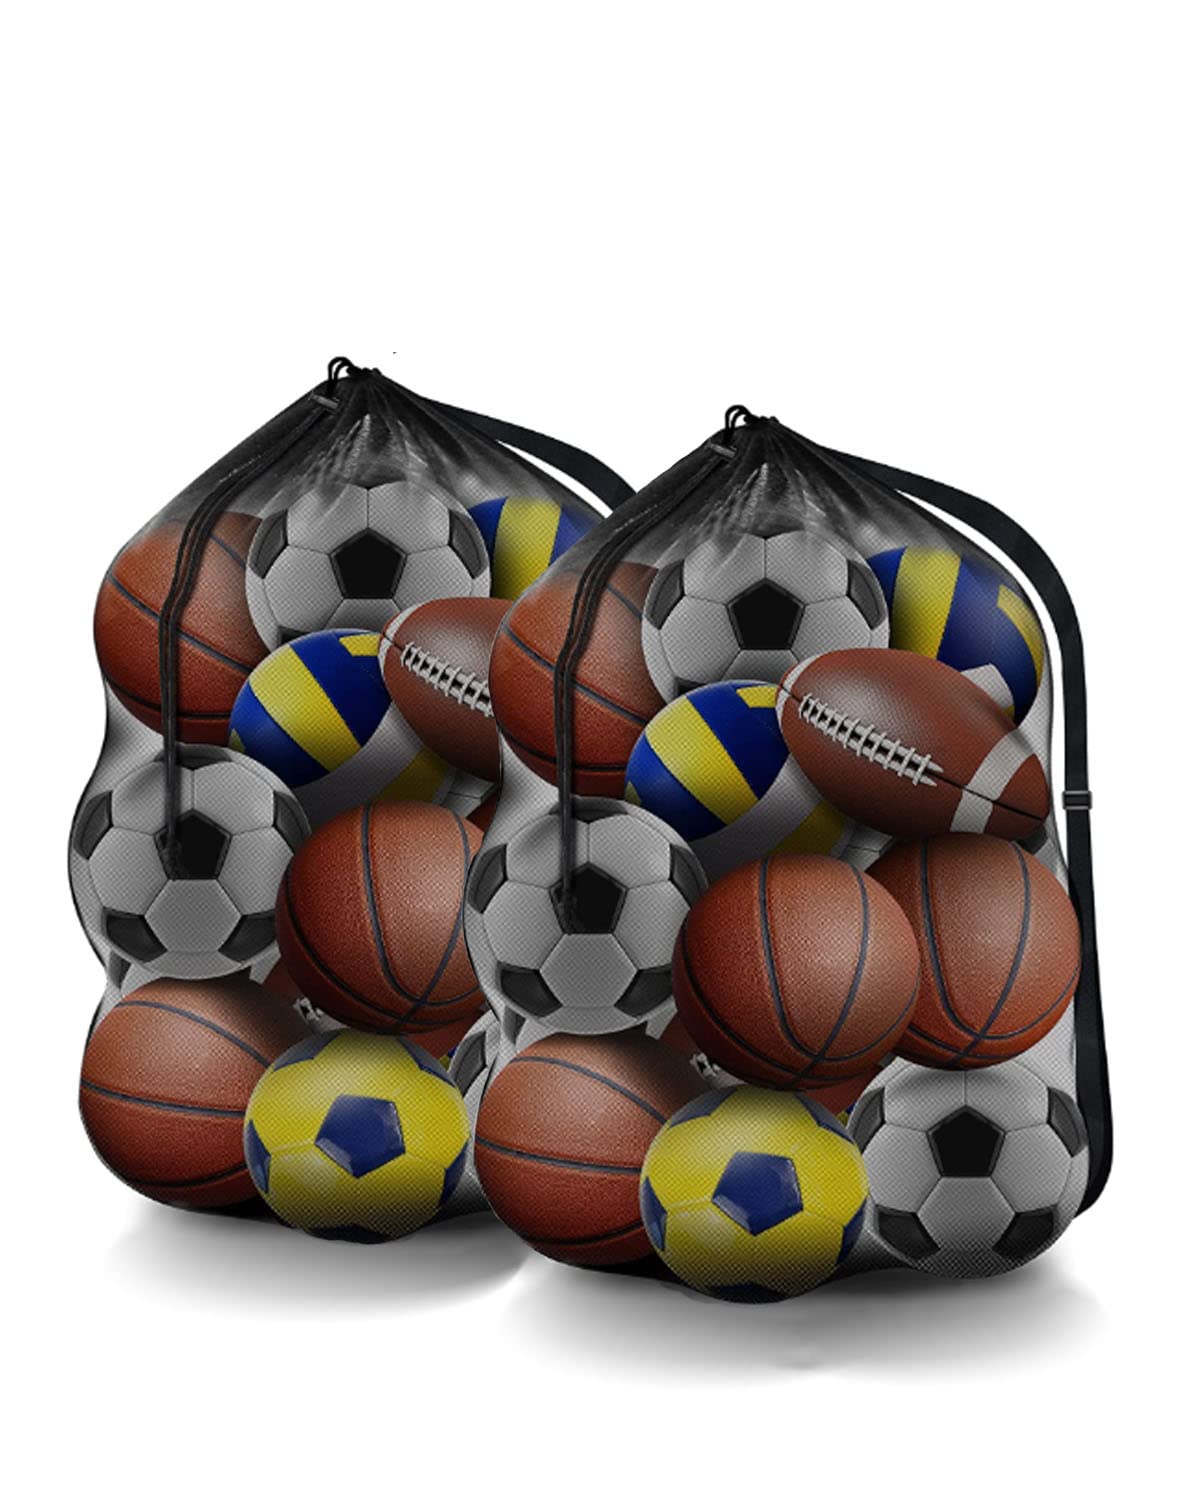 BROTOU Extra Large Sports Ball Bag Mesh, Basketball Bags Team Balls, Adjustable Shoulder Strap, Team Work Ball Bags for Holding Soccer, Football, Volleyball, Swimming Gear (30” x 40”)